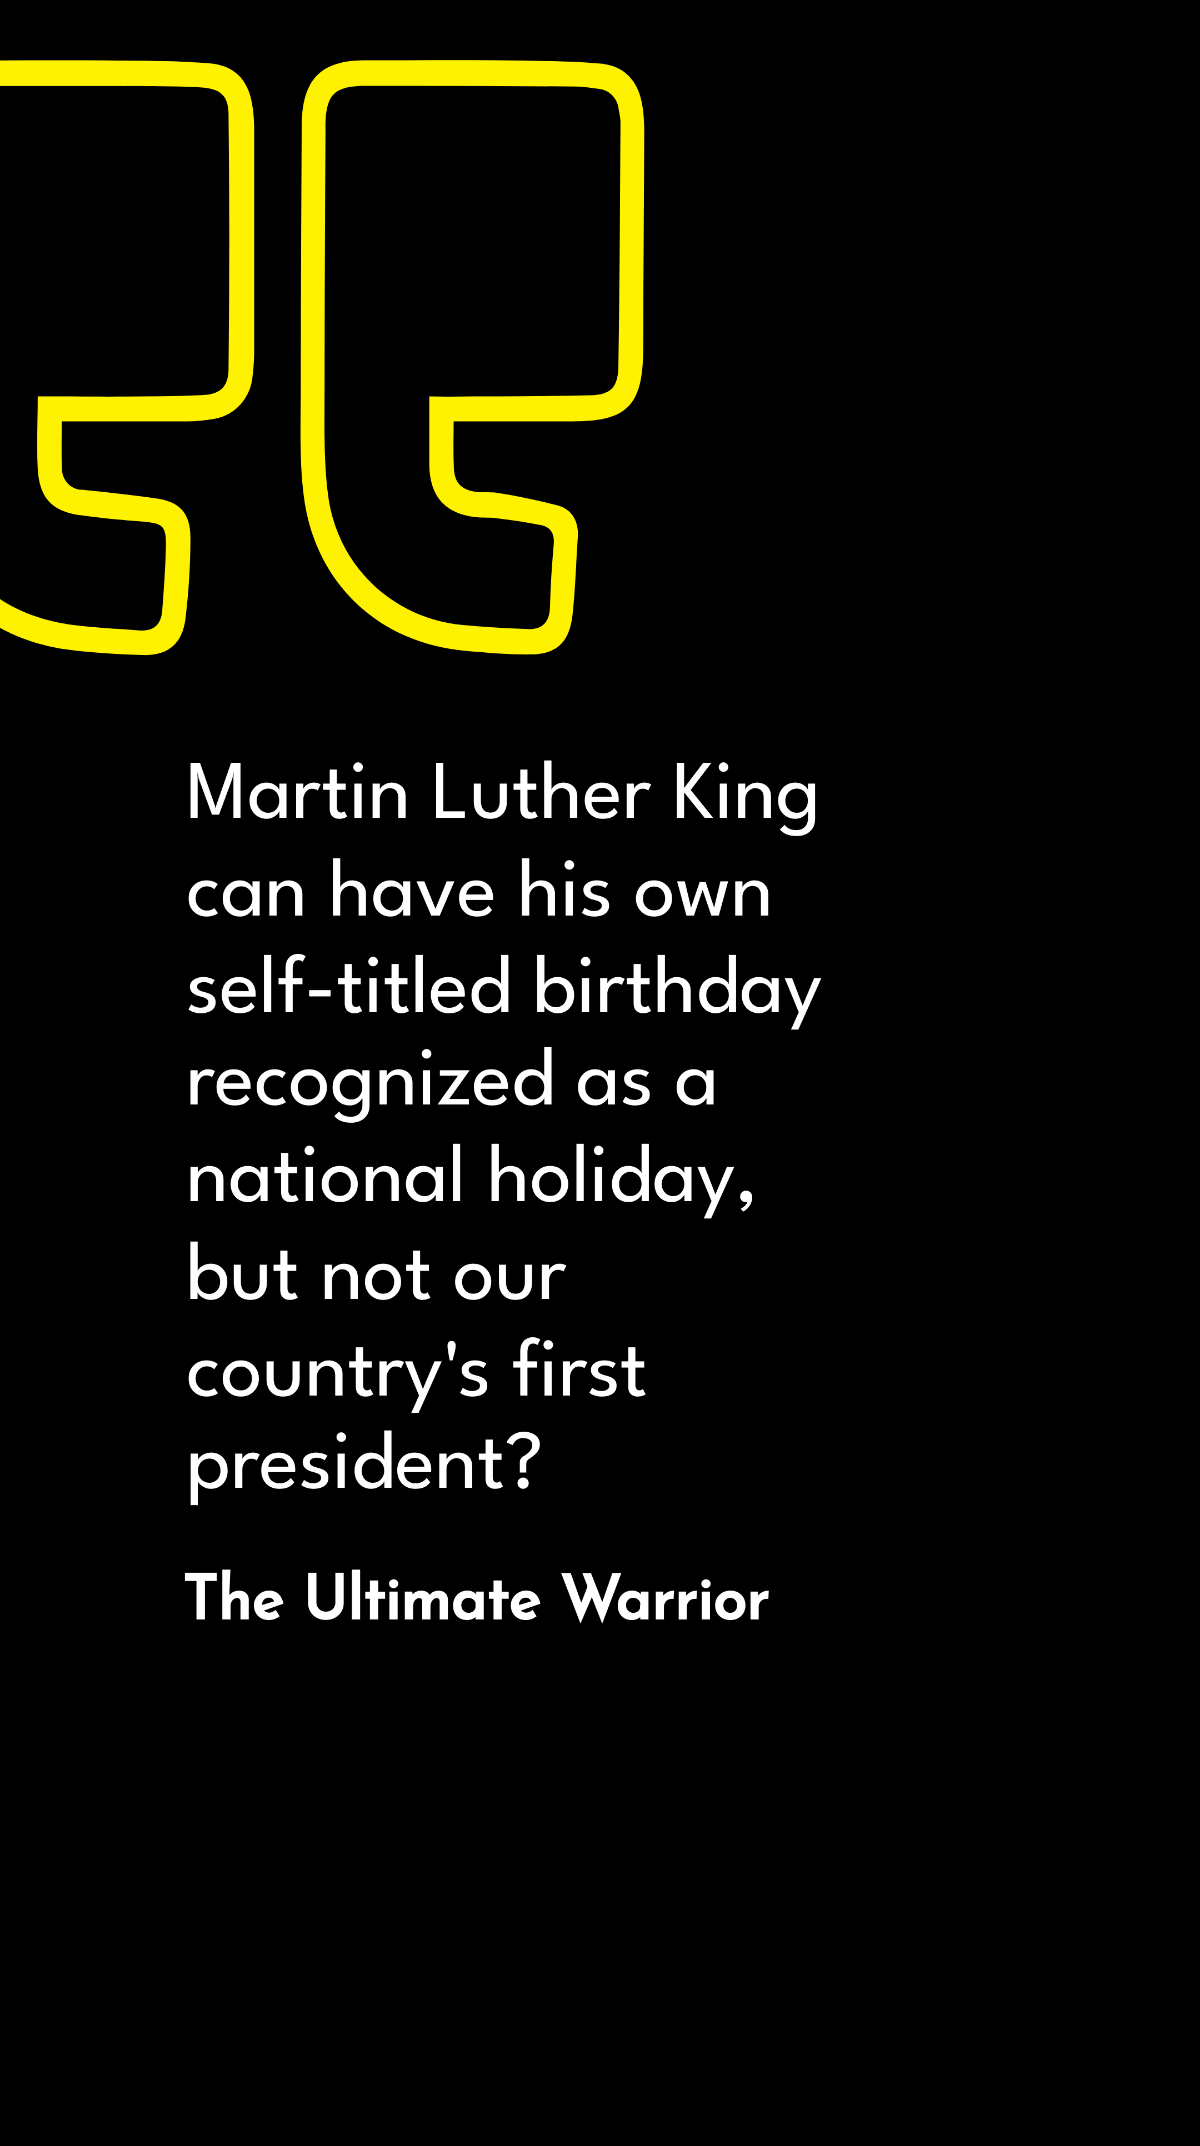 The Ultimate Warrior - Martin Luther King can have his own self-titled birthday recognized as a national holiday, but not our country's first president? Template